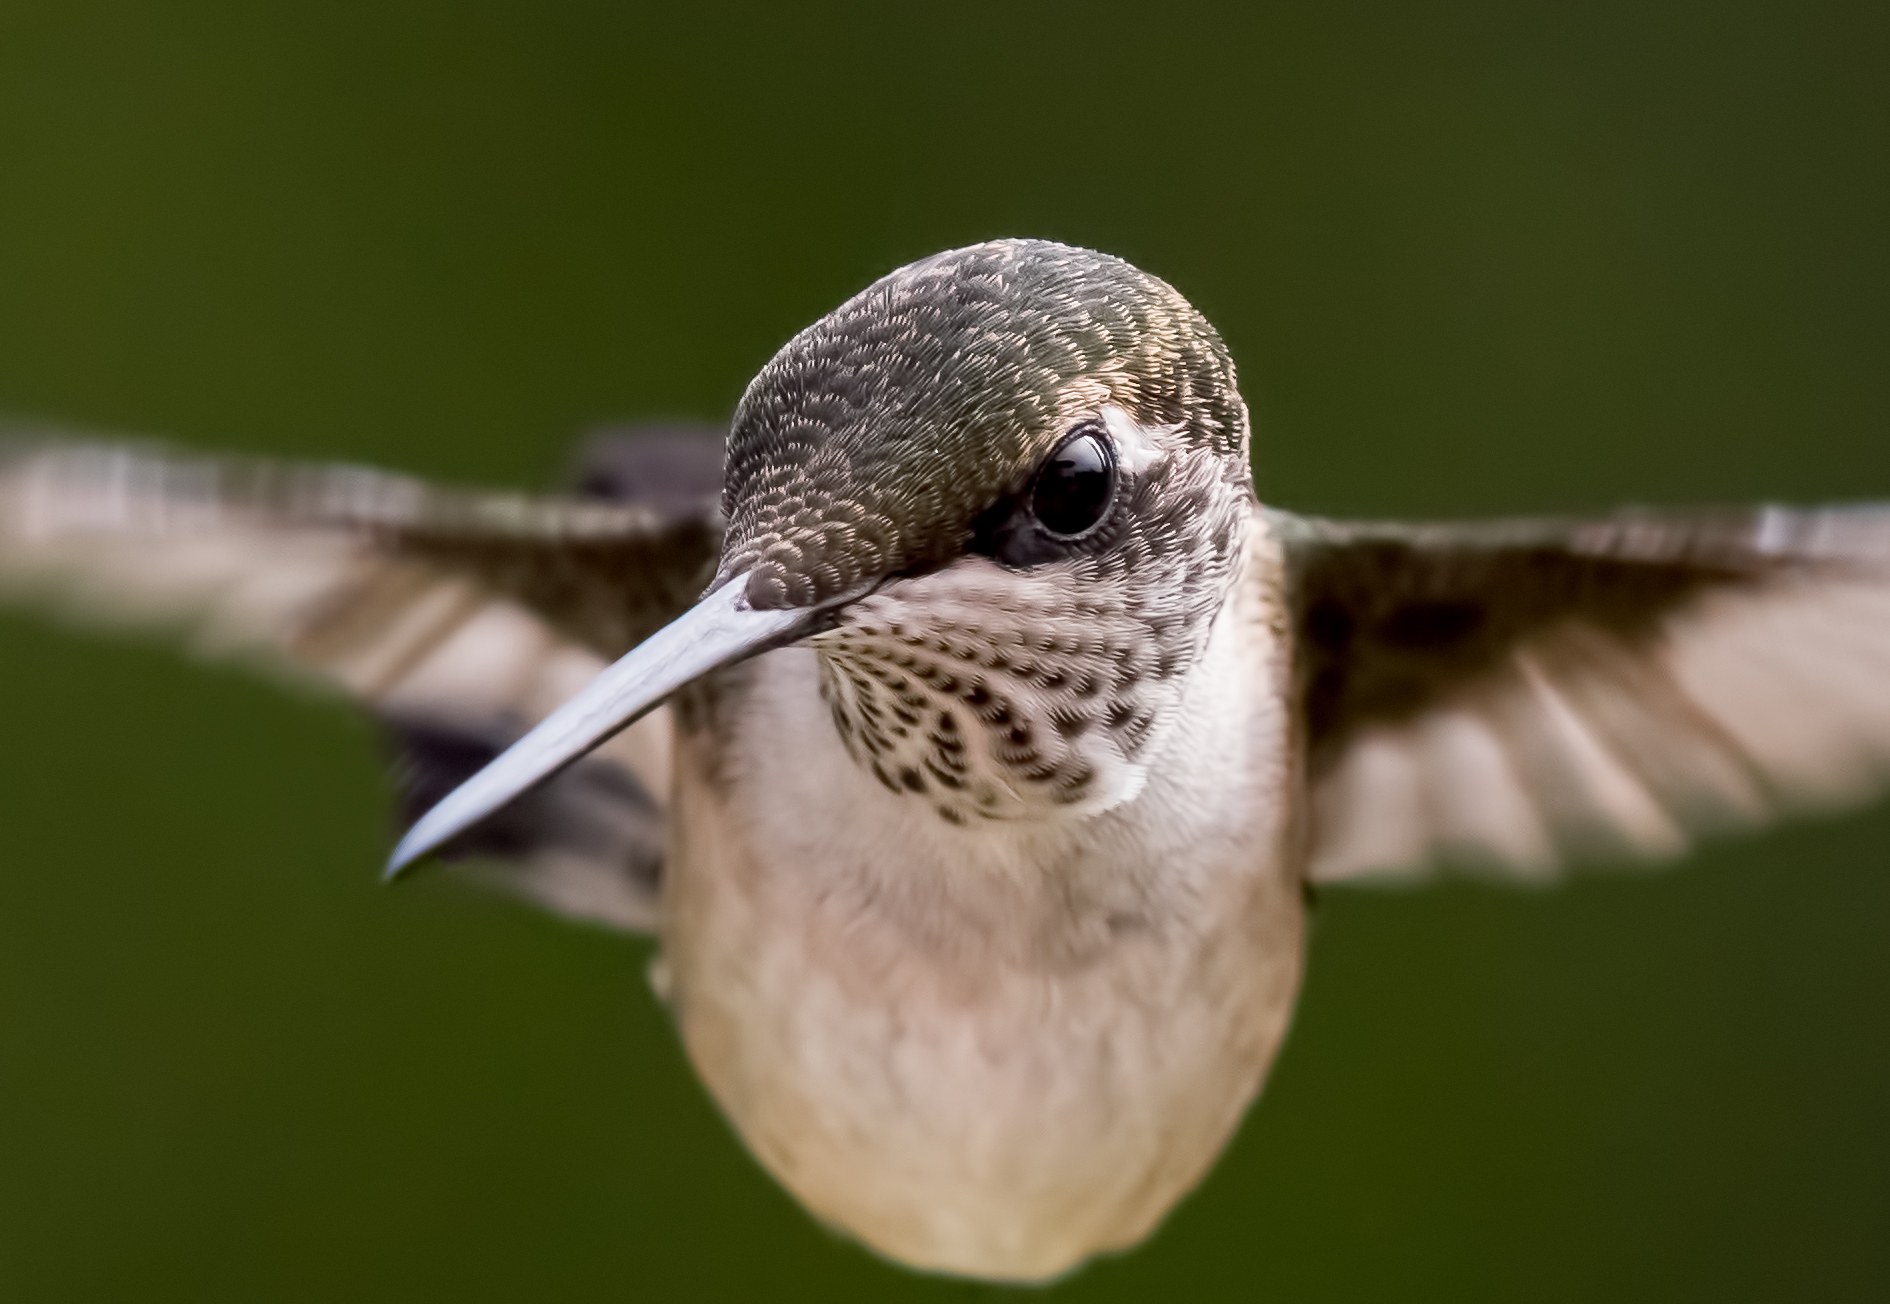 close-up view of a hummingbird flying with wings outstretched